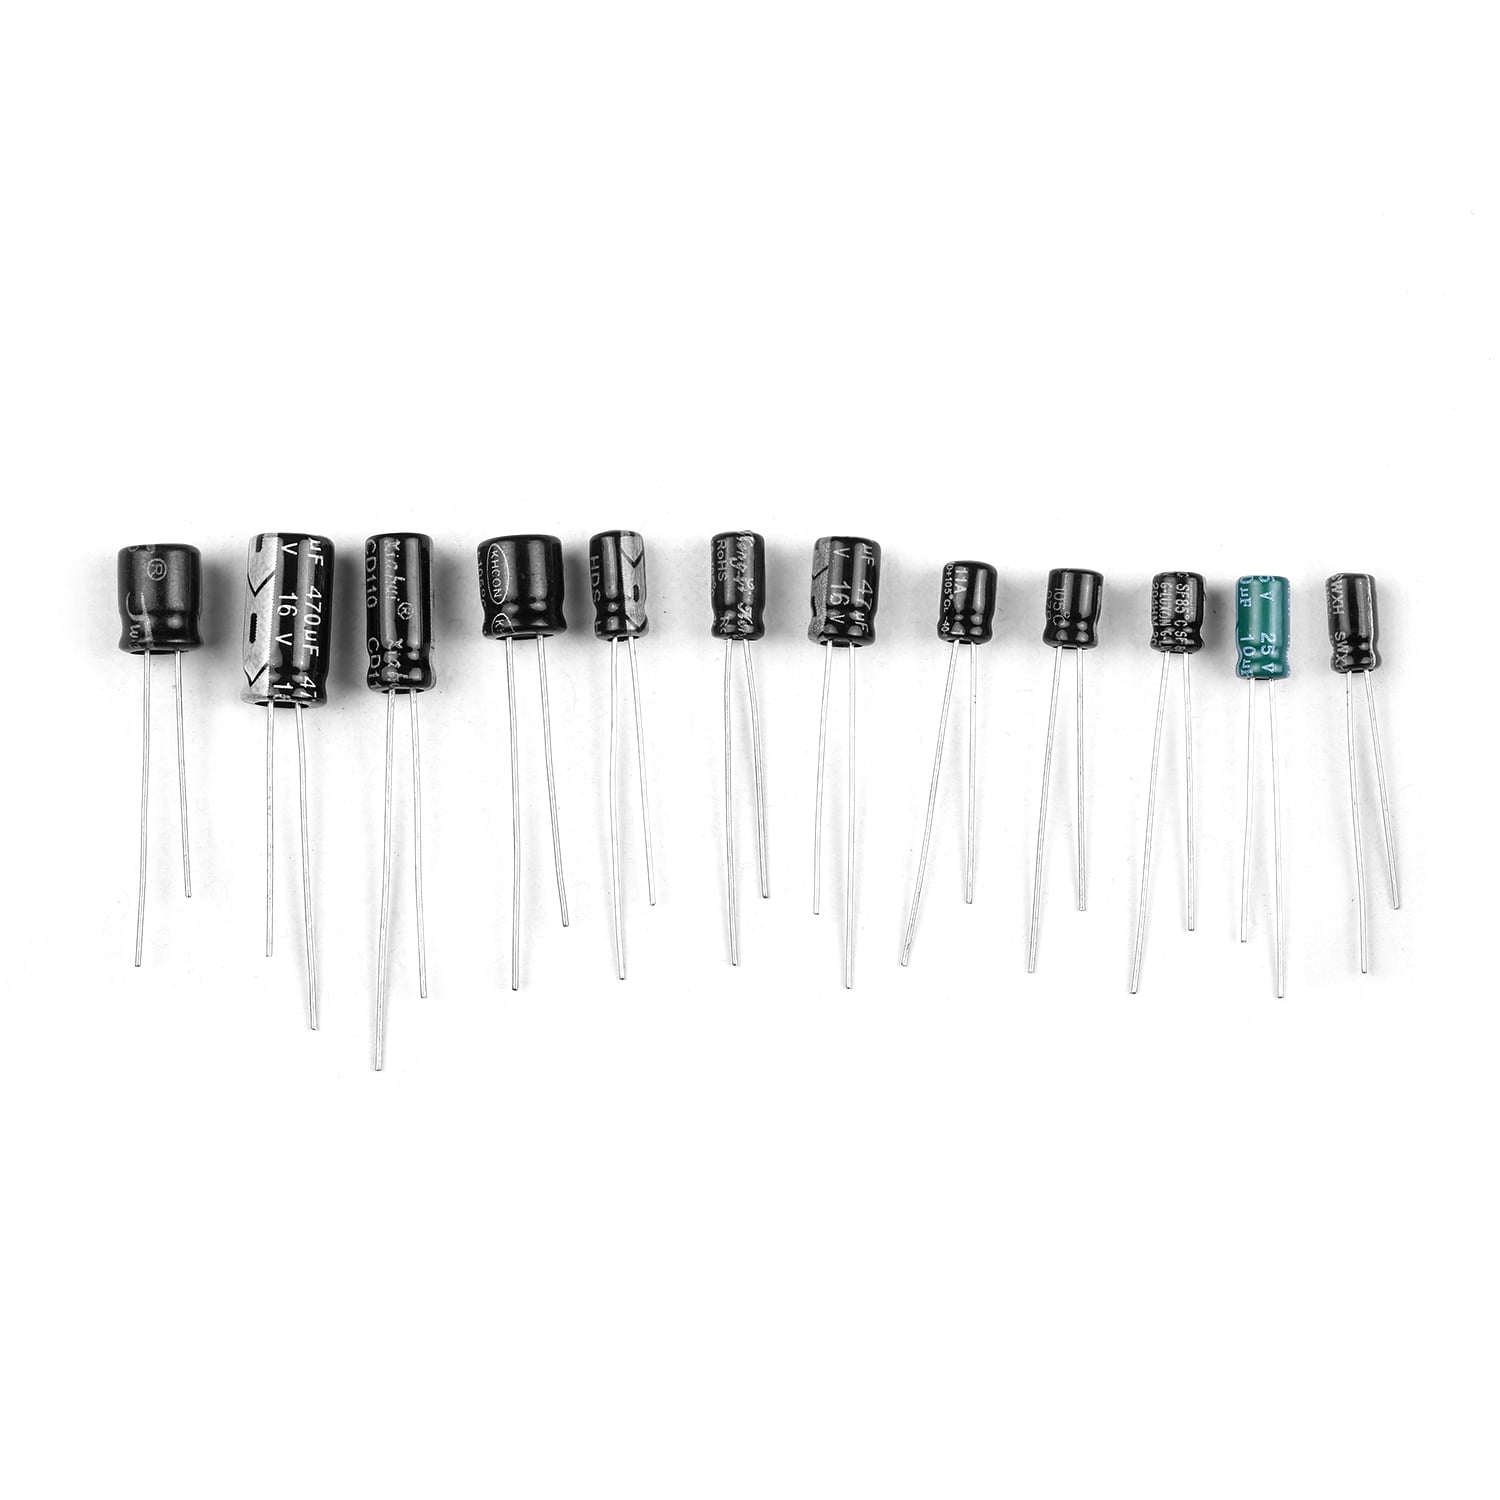 Lot 1390pcs Electronic Components LED Diode Transistor Capacitor Resistance Kits